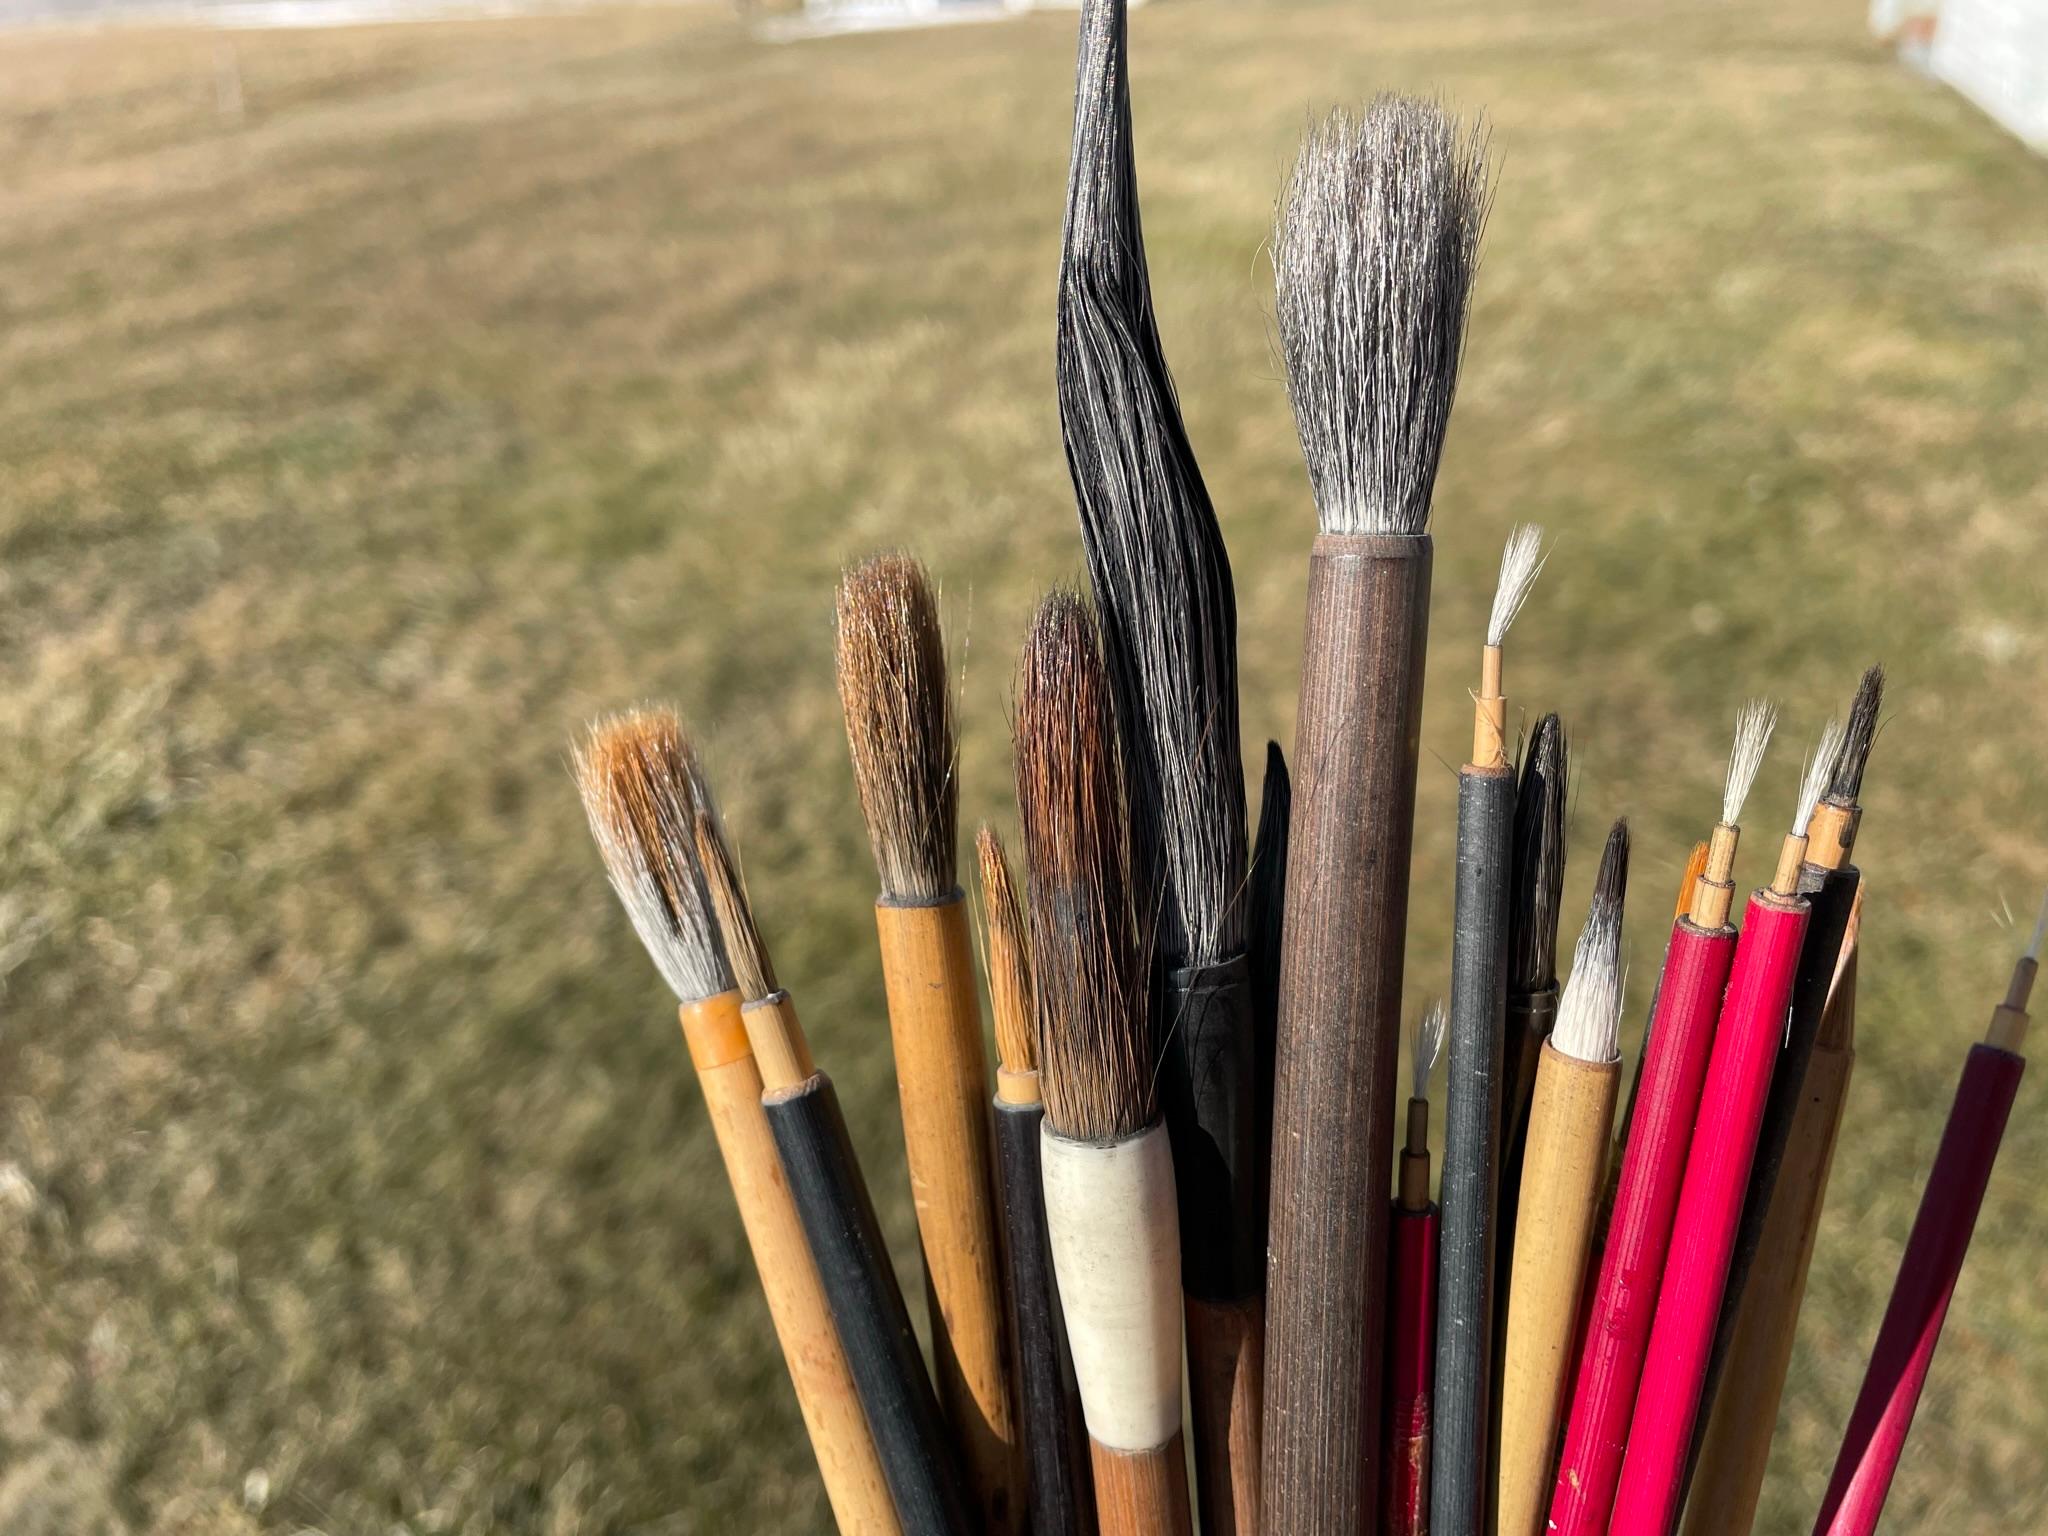 Hand-Crafted Artisan's Discovery 25 Old Chinese Paint Brushes